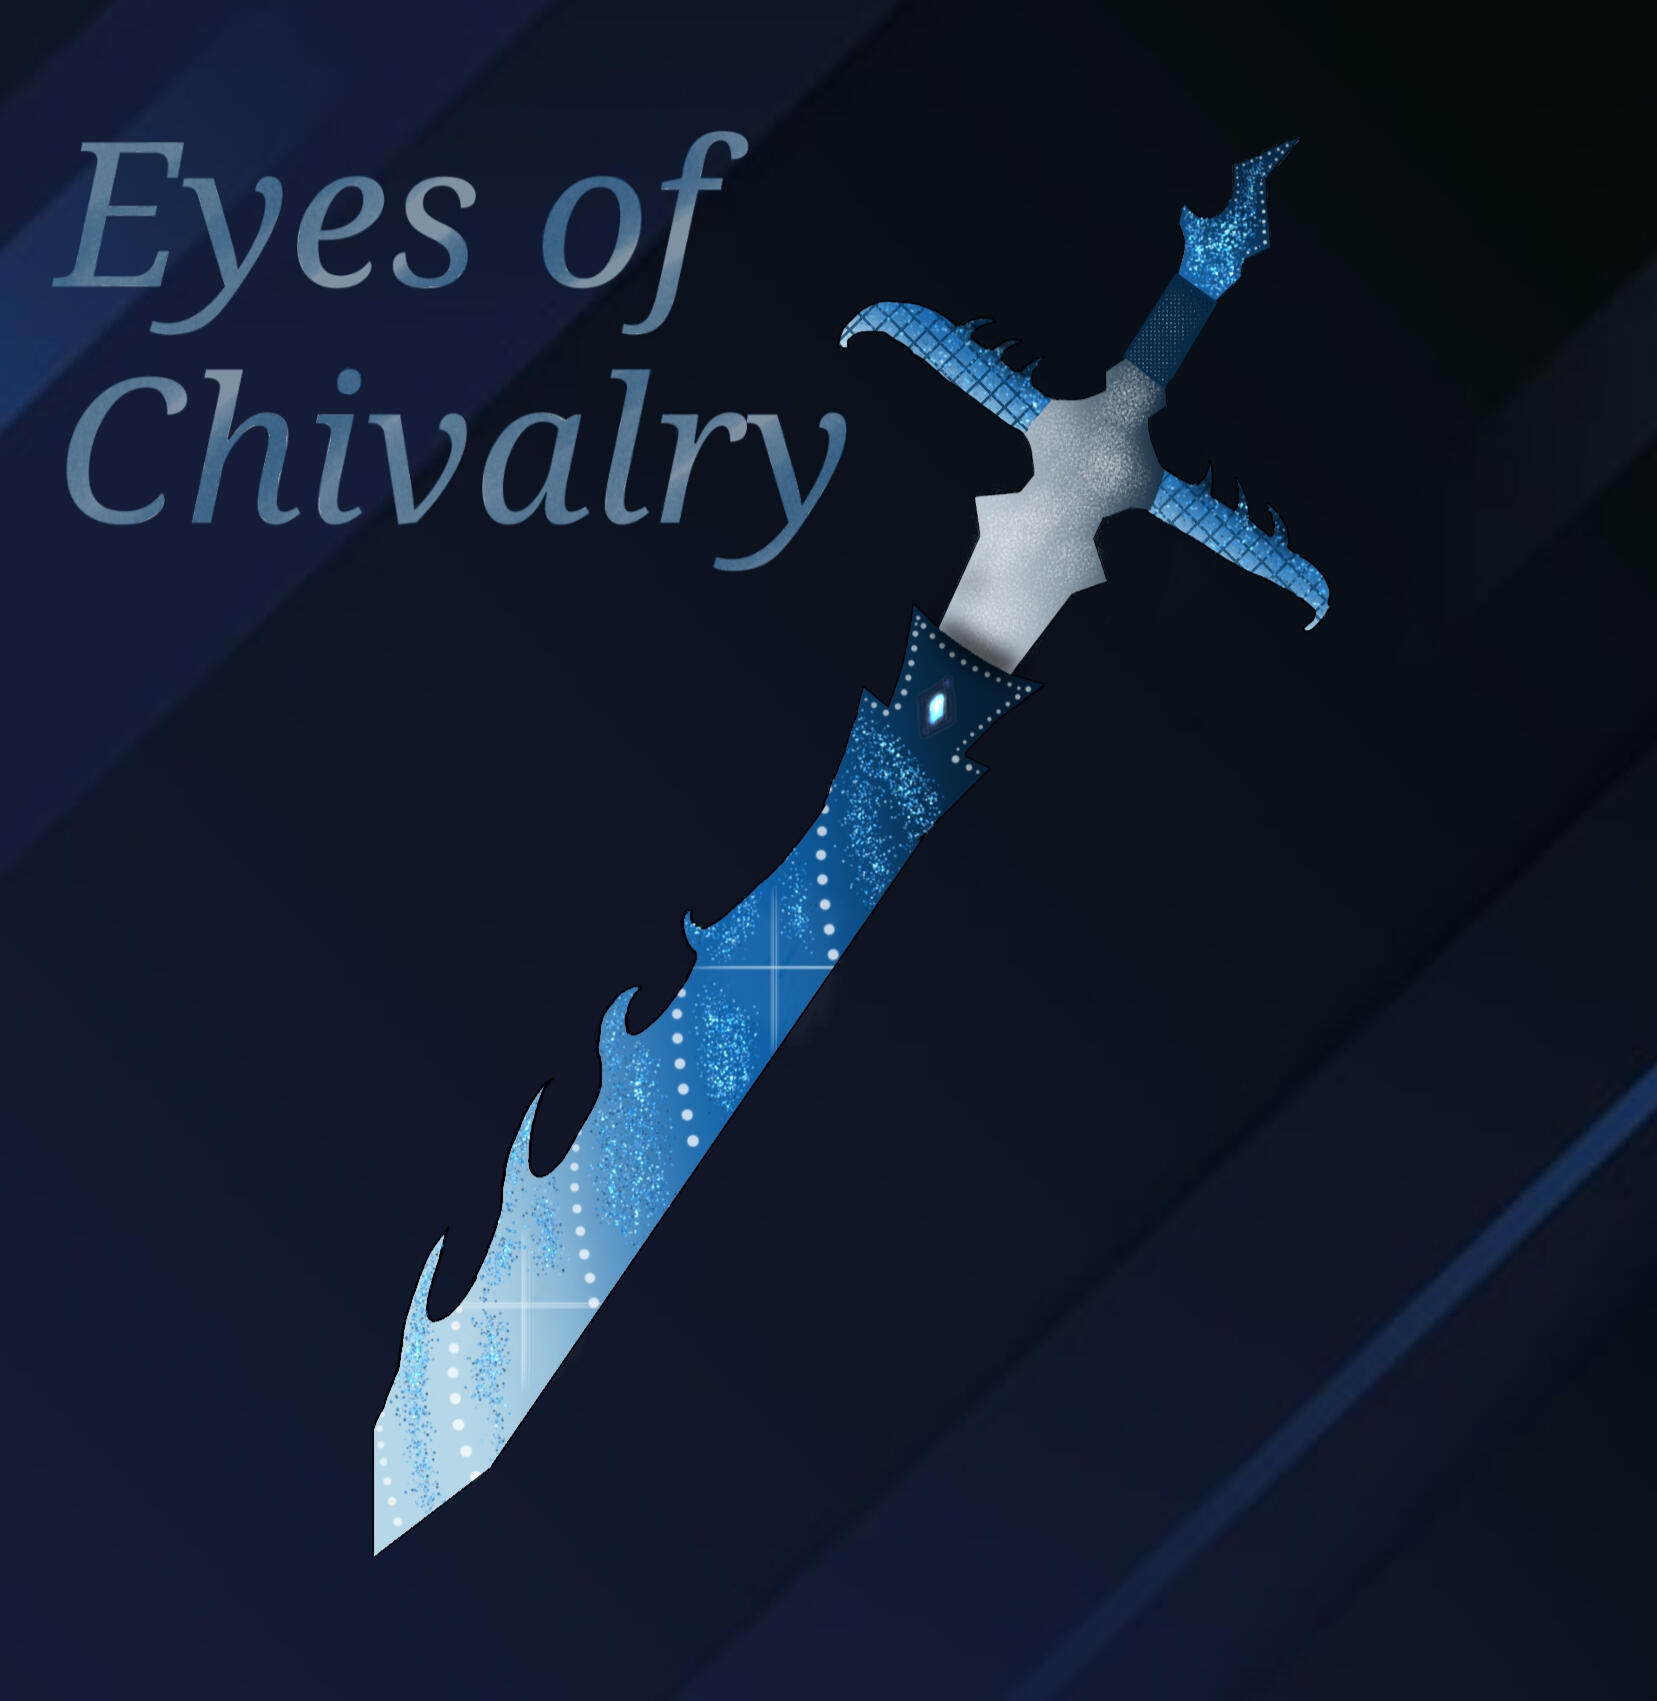 This is also another digital art I drew in my personal time. I named this one the &quot;Eyes of Chivalry&quot;.